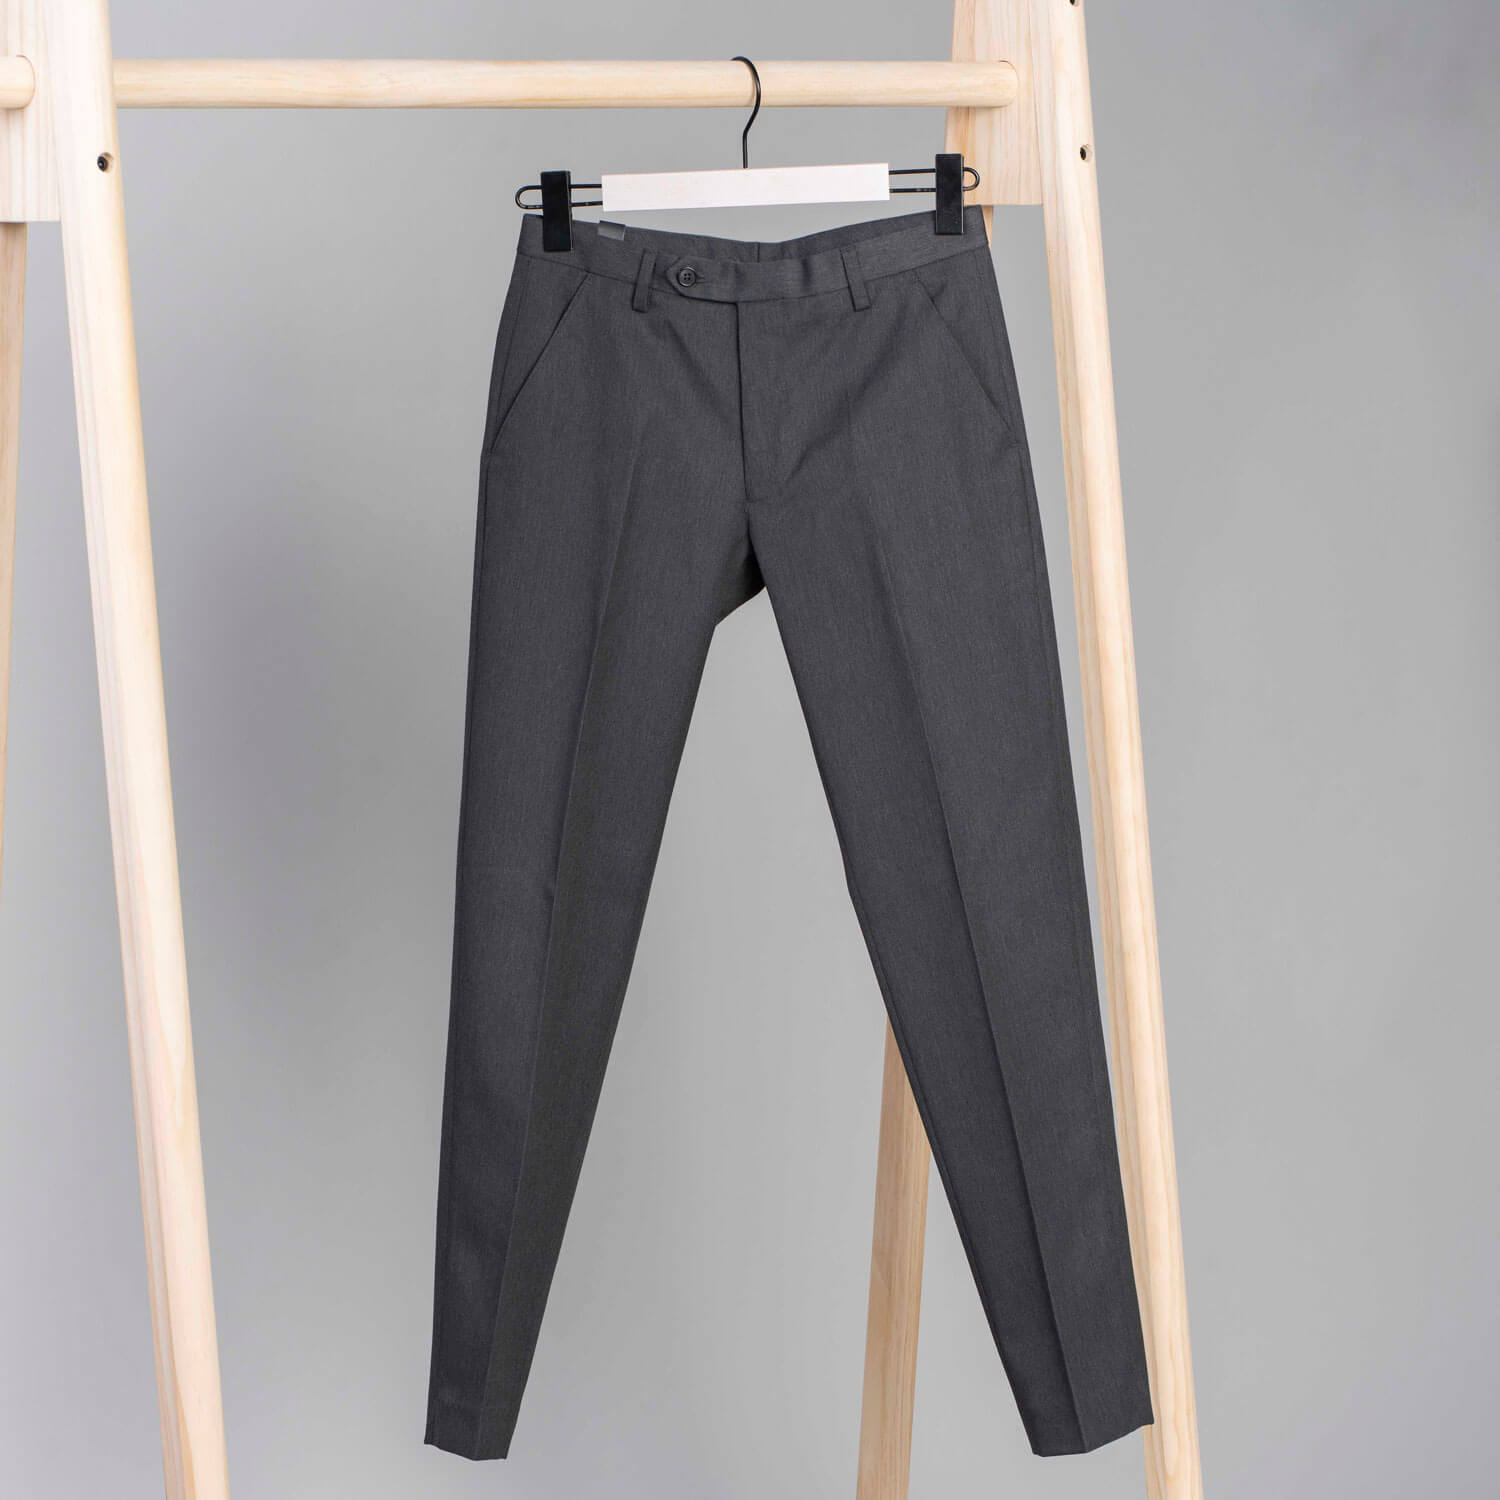 Blue Dot Lewis Youth Boys Trousers - Grey 1 Shaws Department Stores